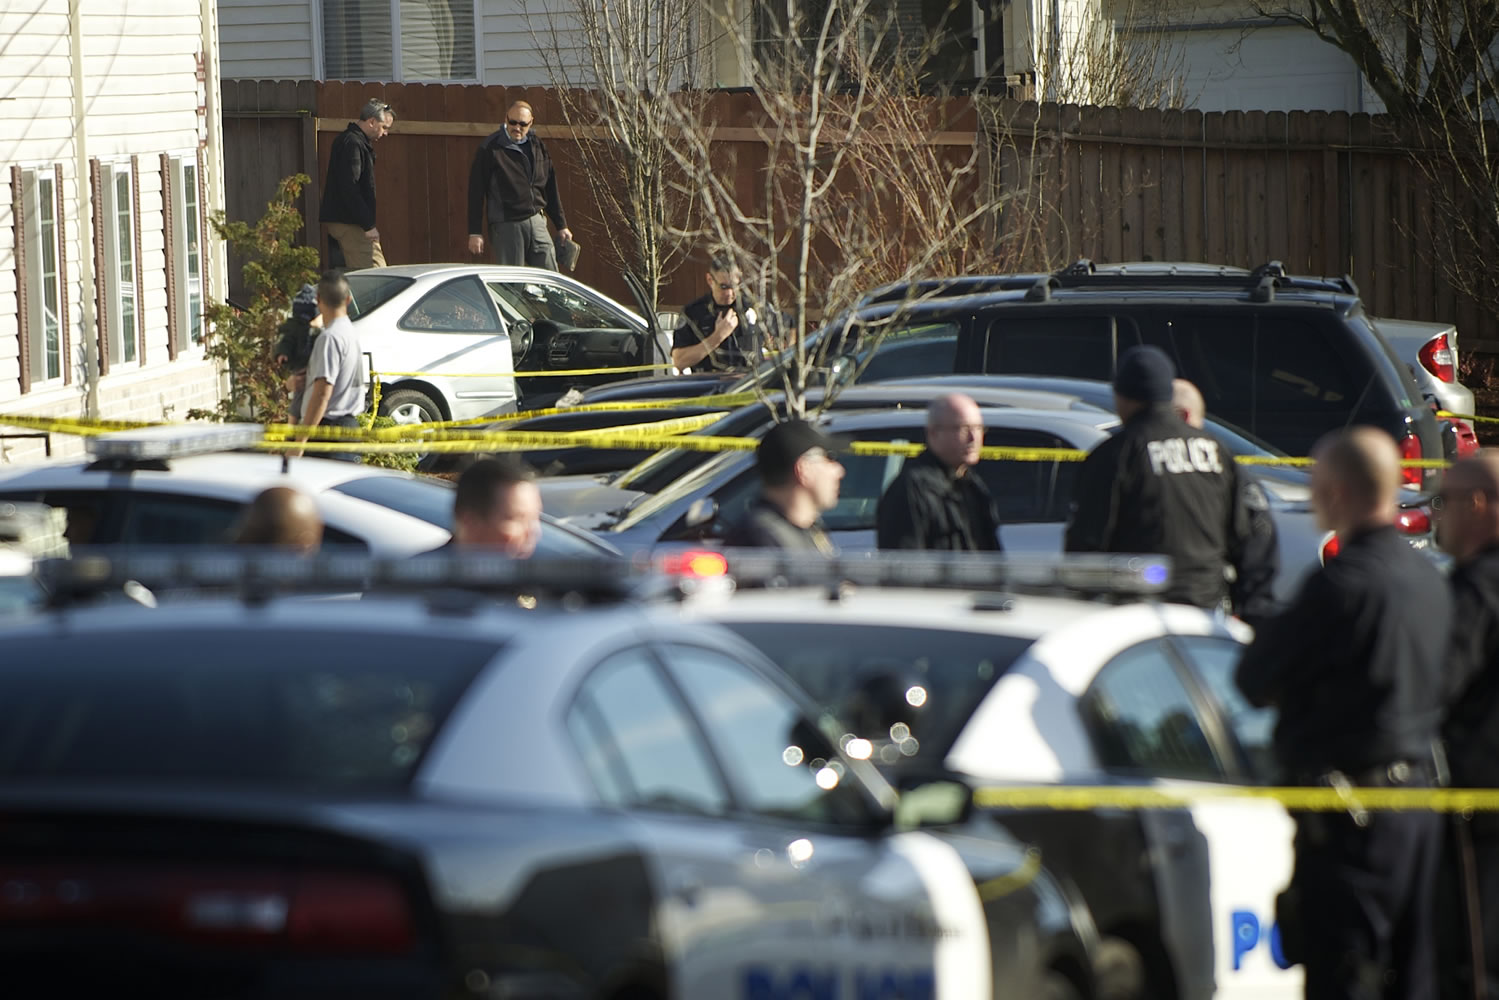 Police investigate a fatal shooting involving undercover police officers Friday January 18, 2013 at the Addison Apartments in Vancouver, Washington.